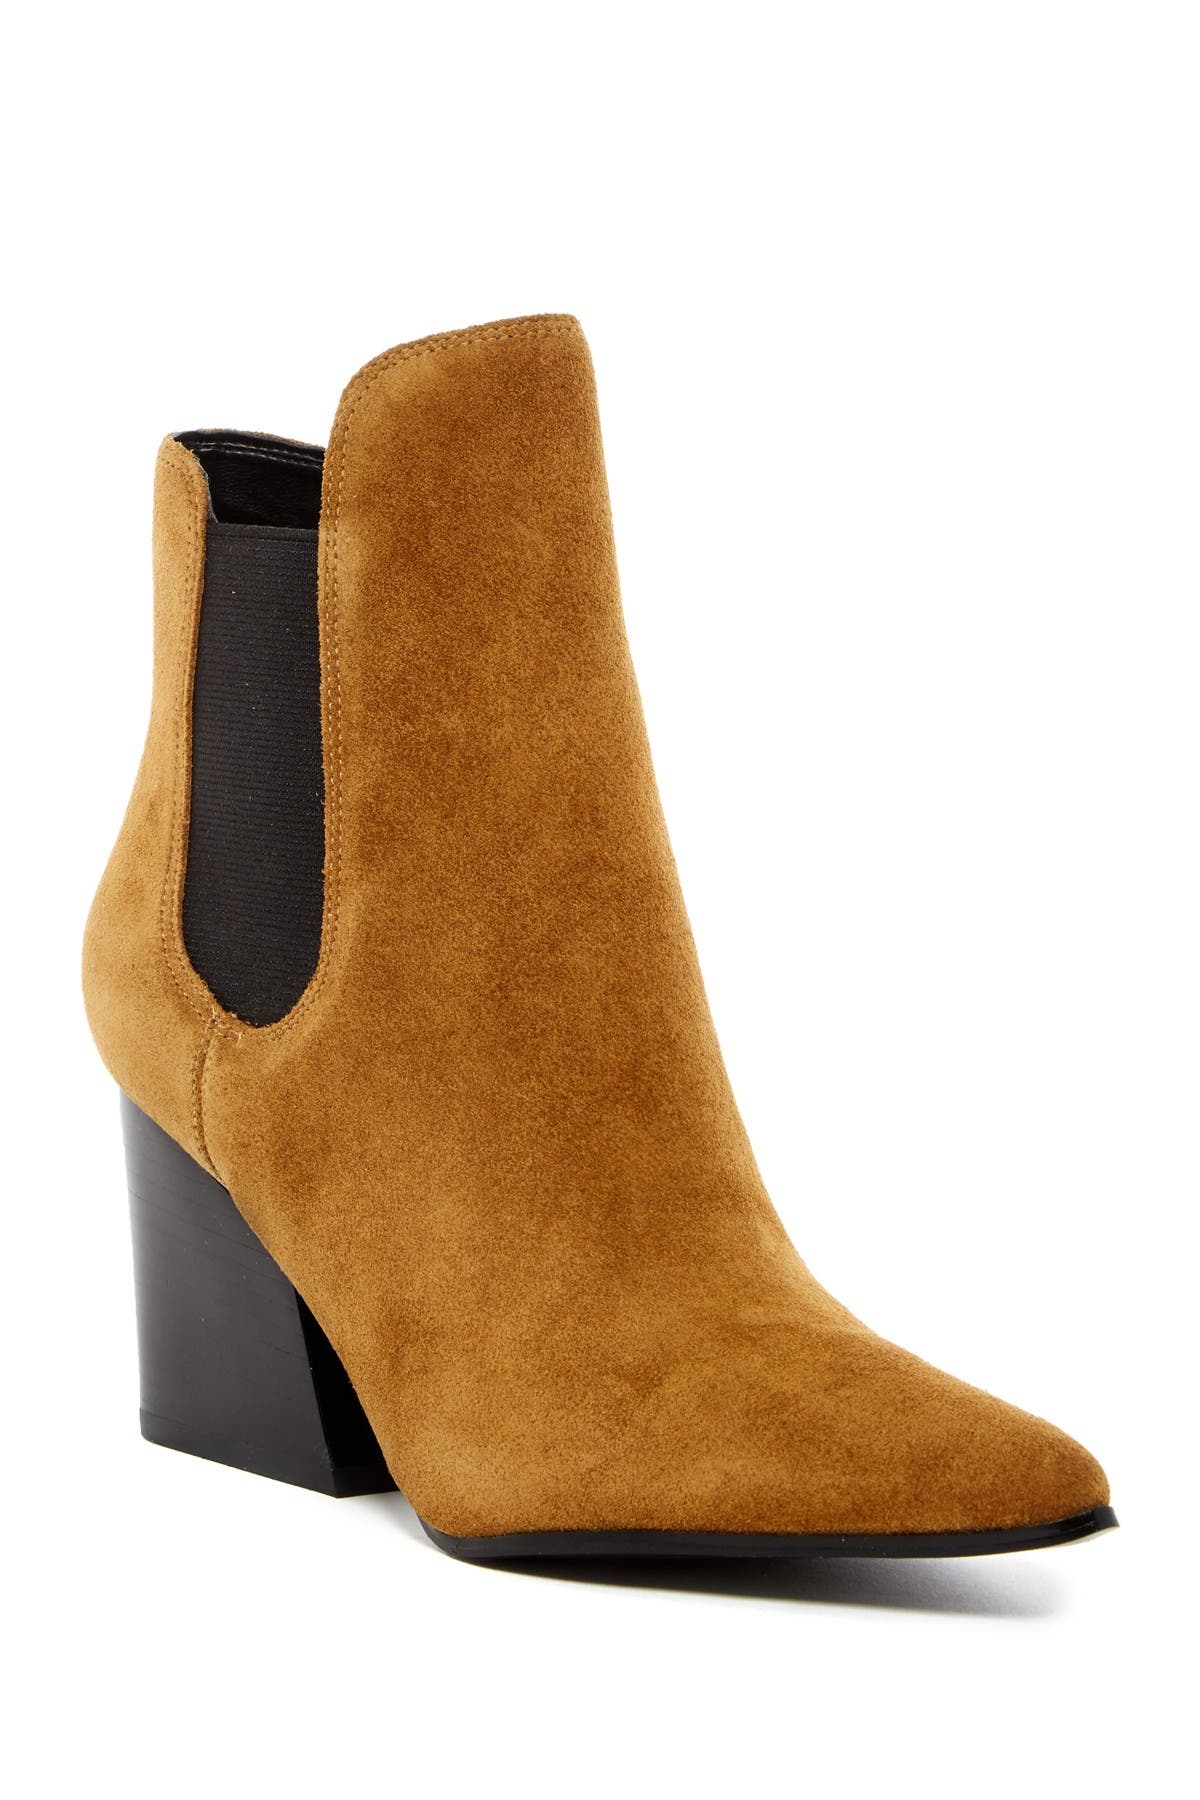 kendall kylie finley chelsea boot